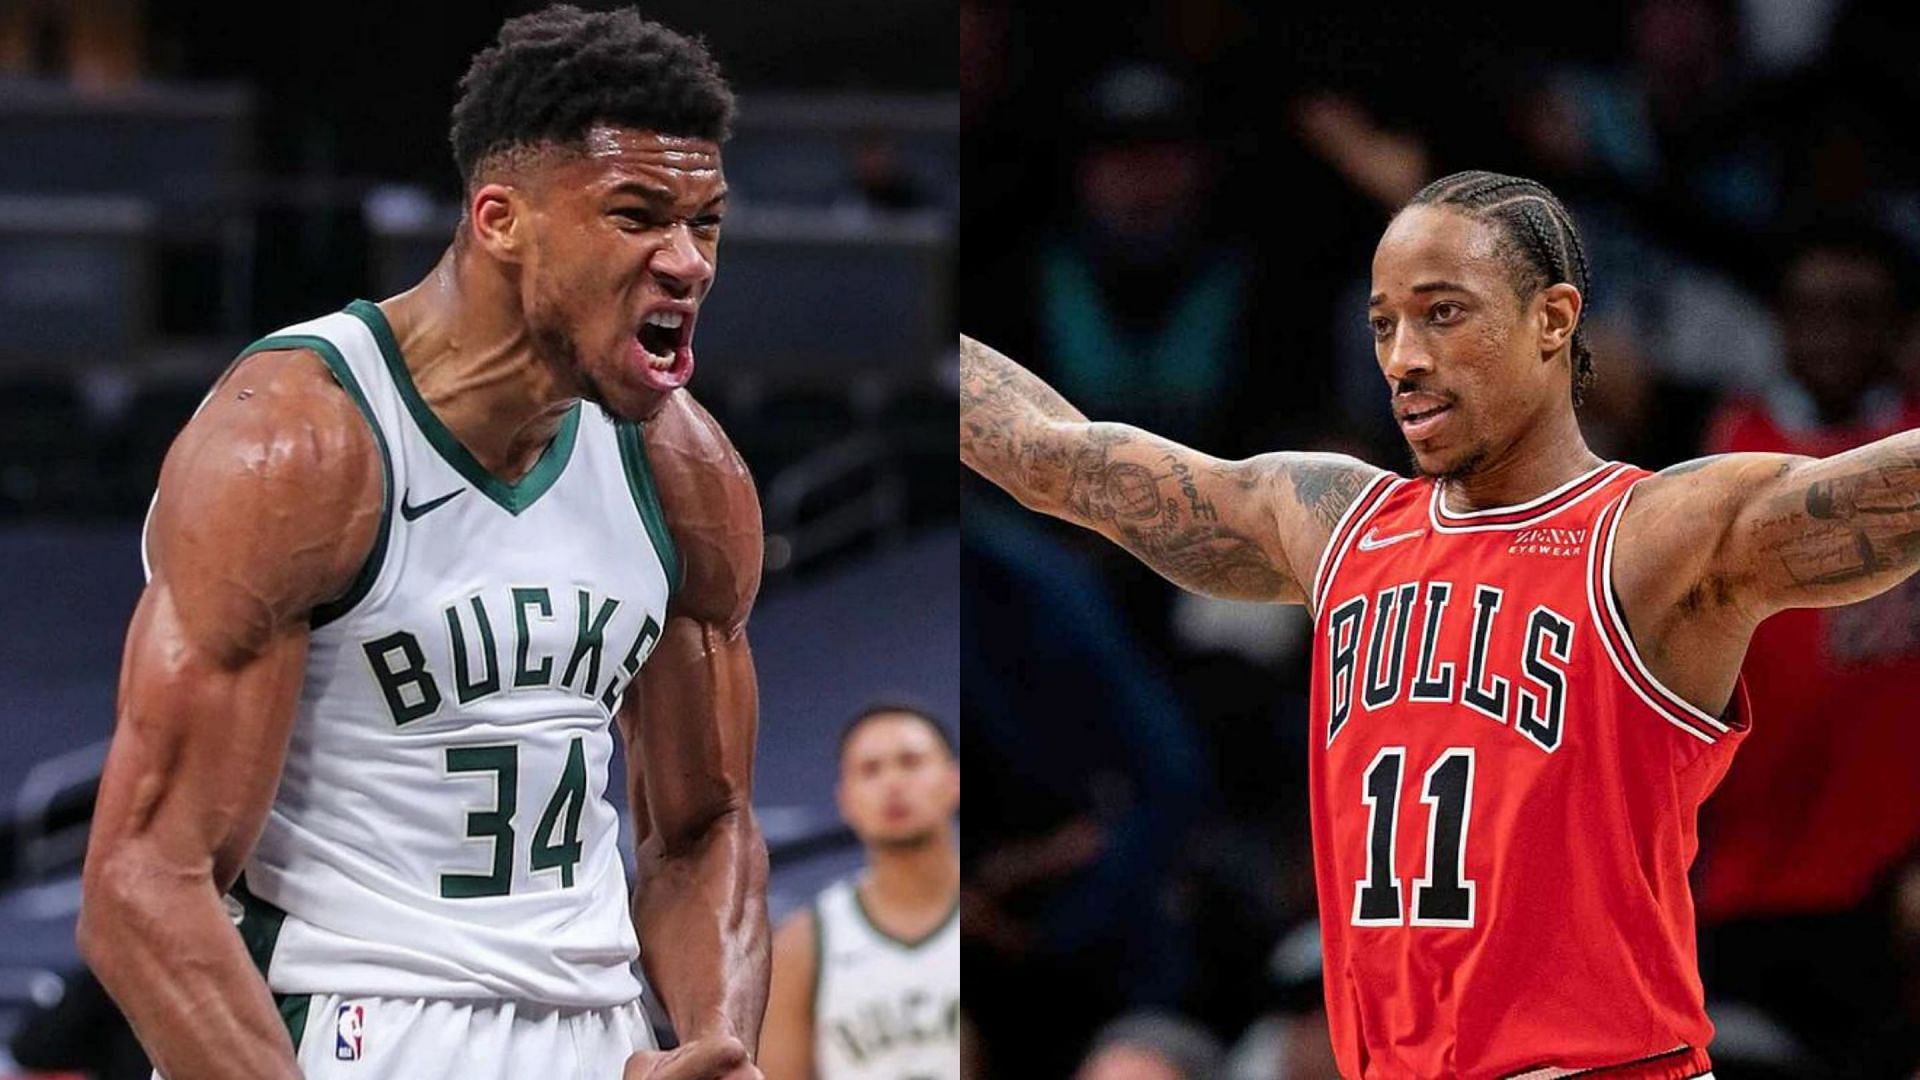 The Chicago Bulls will host the Milwaukee Bucks on March 4th.